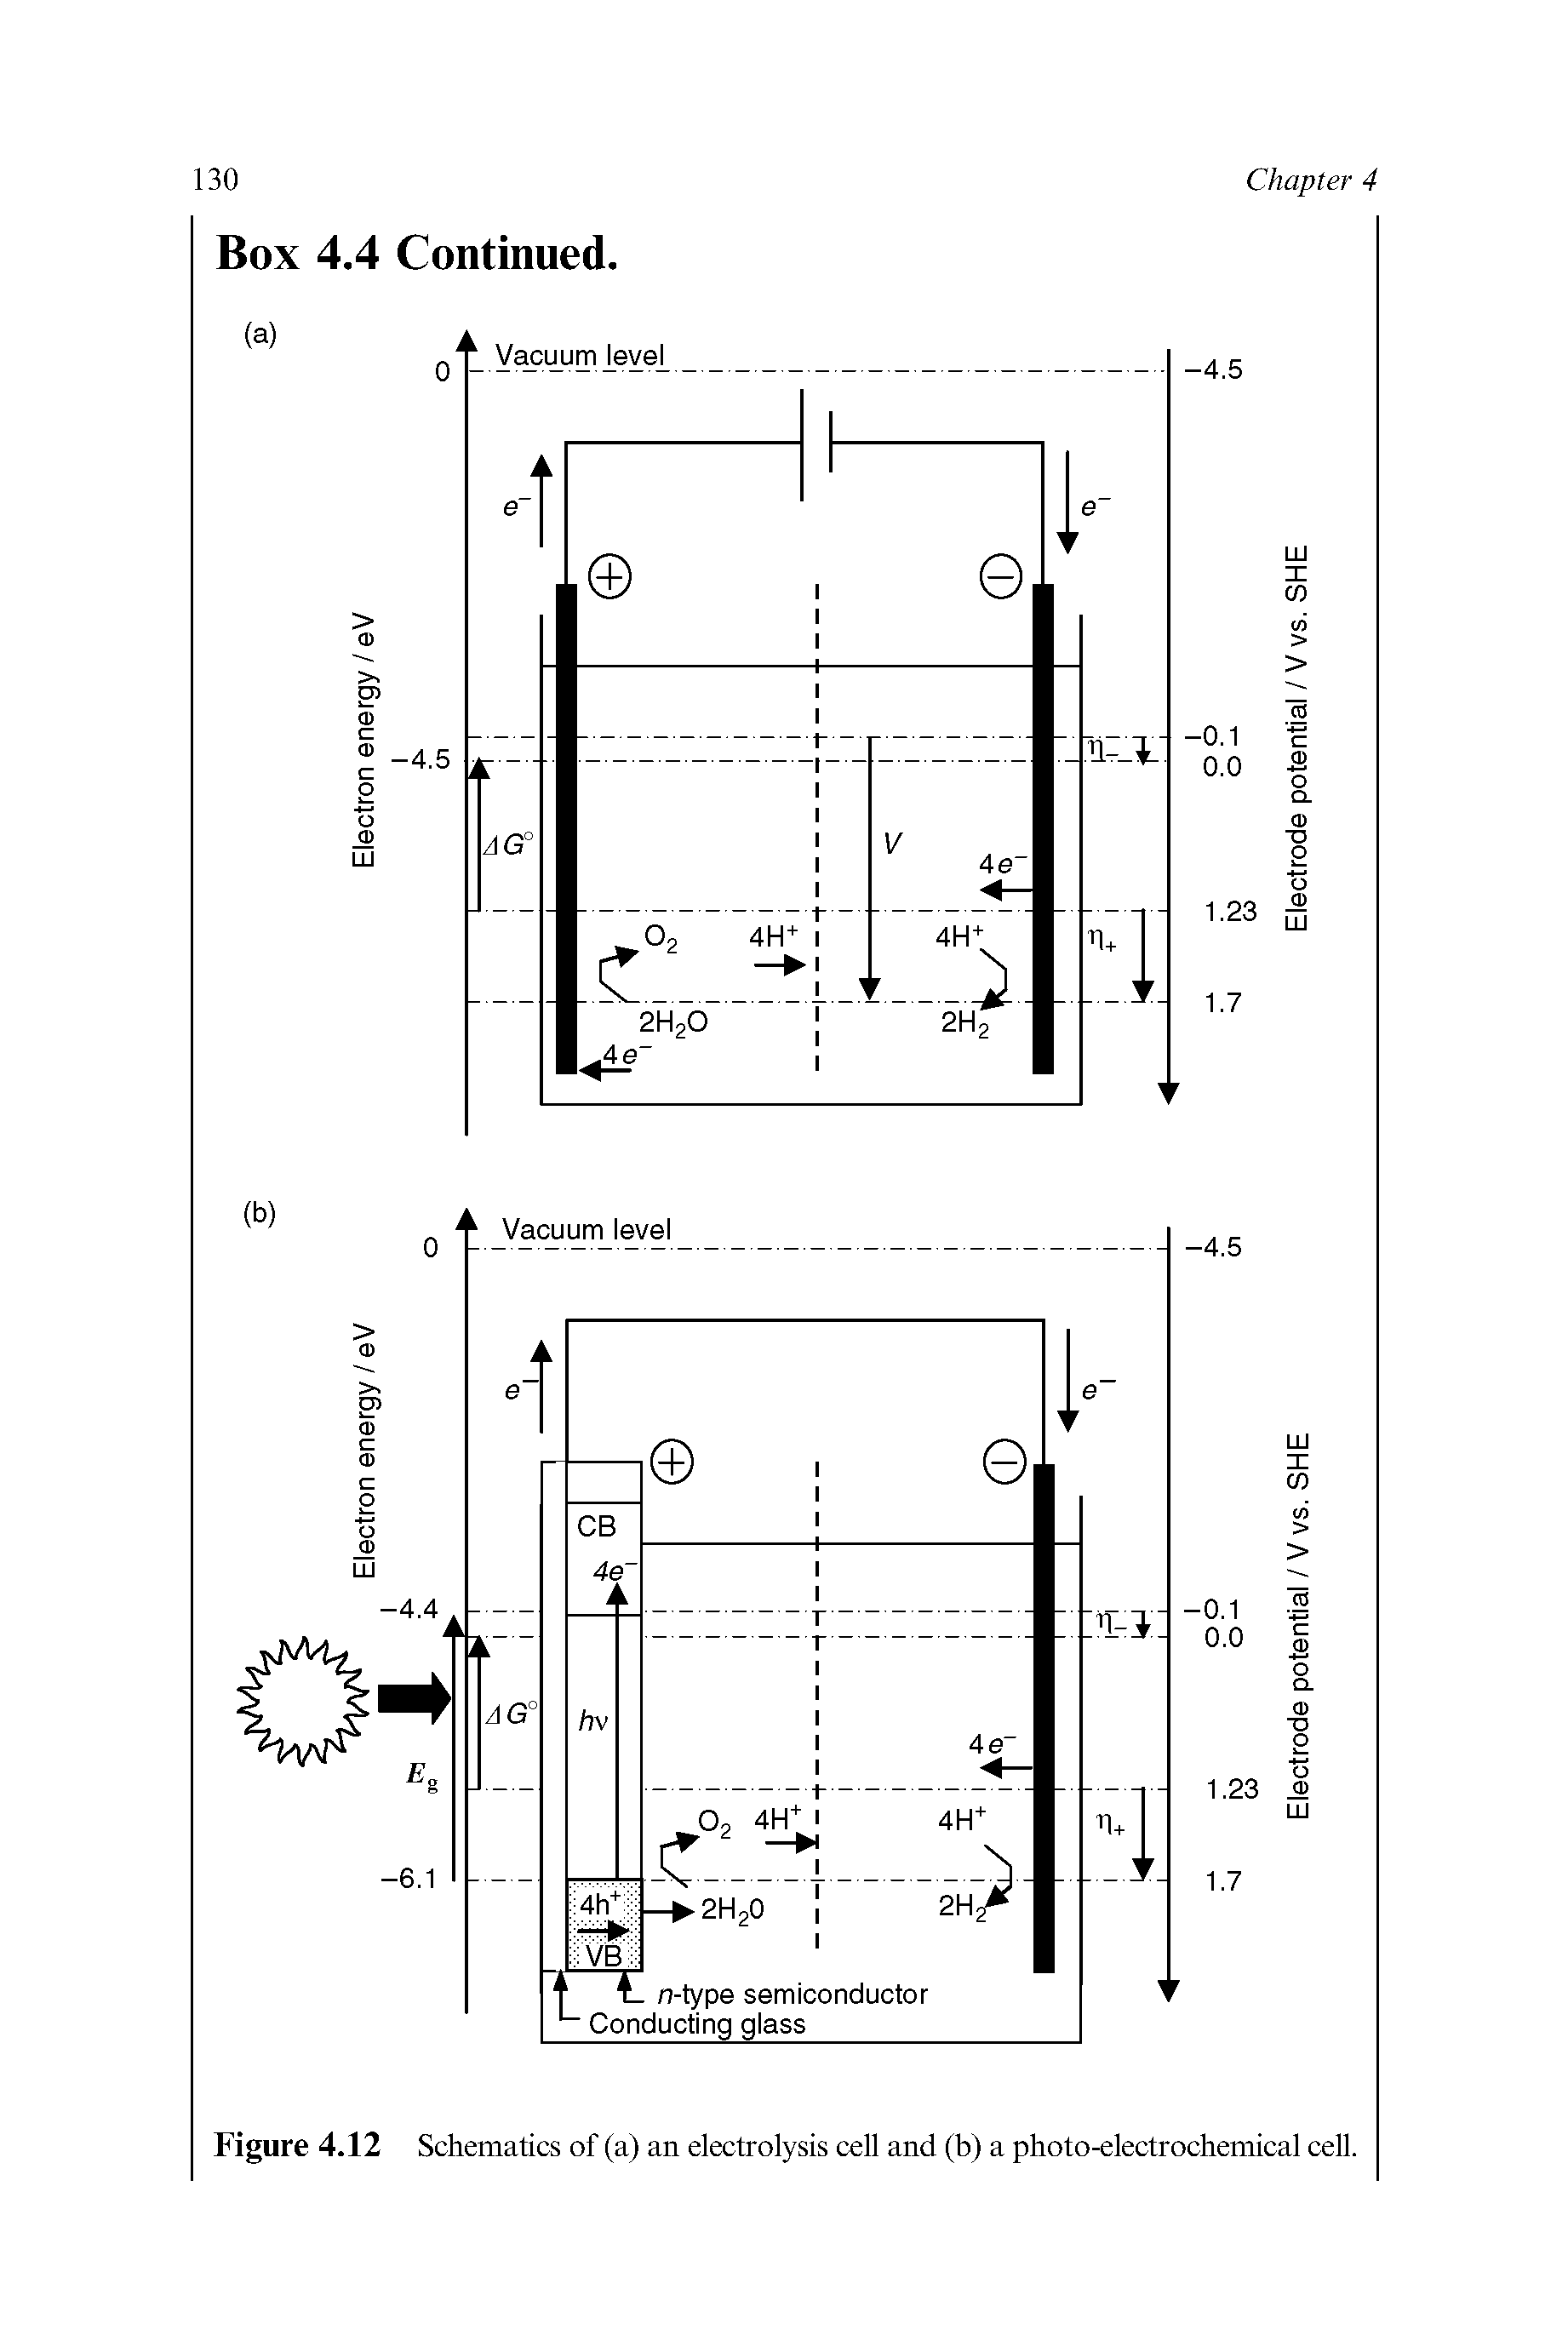 Figure 4.12 Schematics of (a) an electrolysis cell and (b) a photo-electrochemical cell.